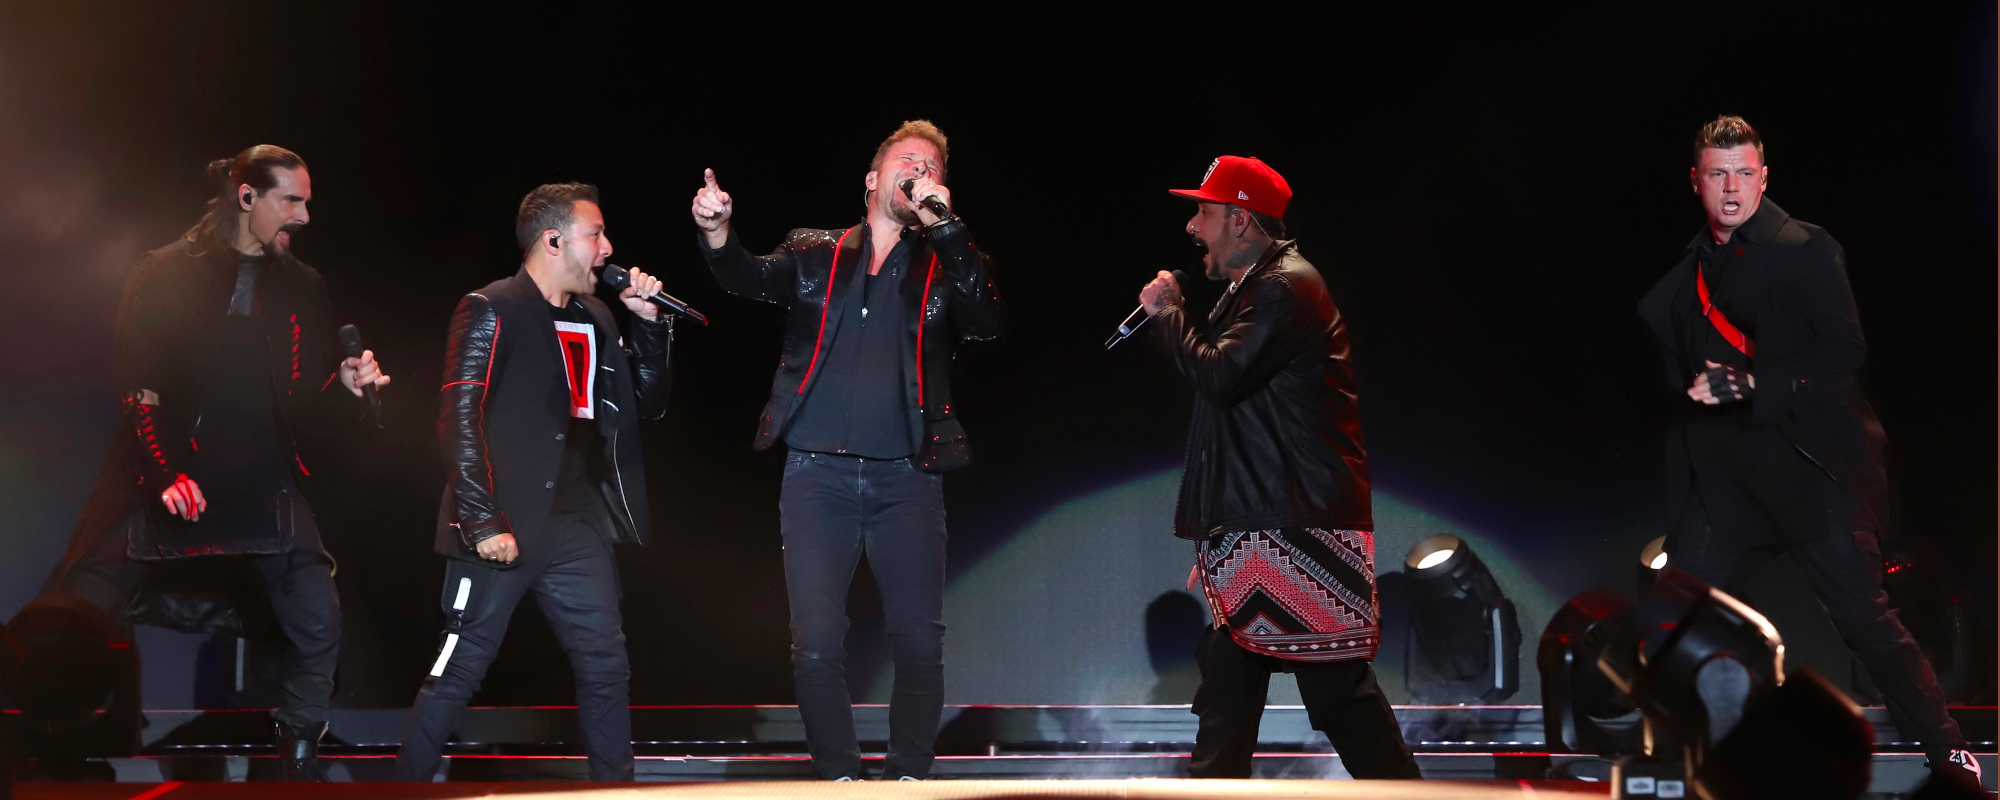 Backstreet Boys Share Emotional Live Tribute to Aaron Carter, Nick Carter Responds to Brother’s Death